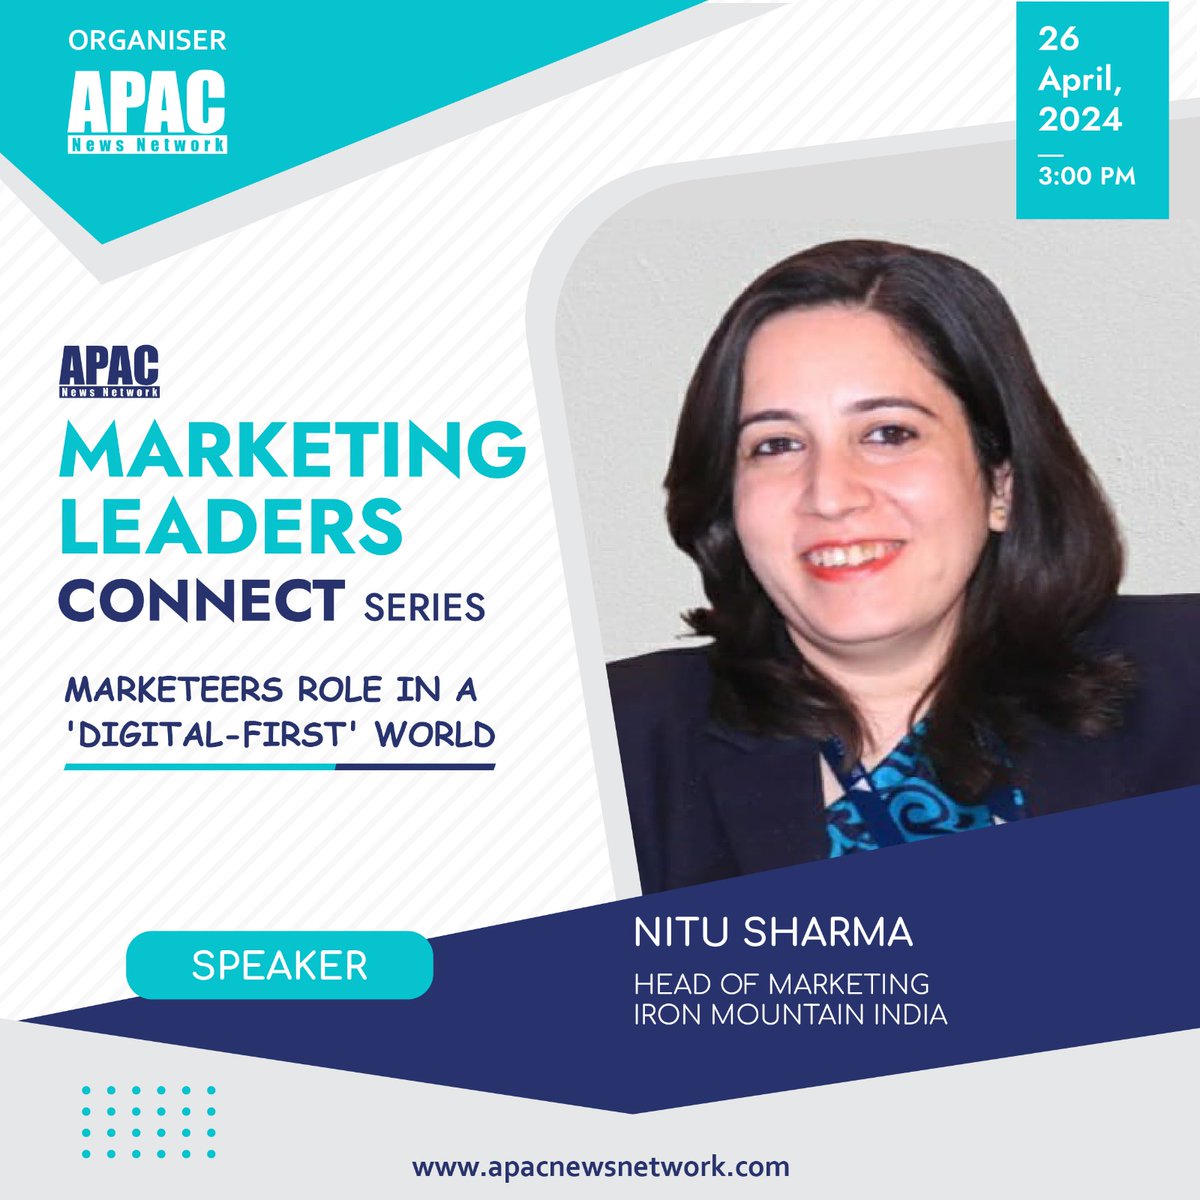 We’re excited! Nitu Sharma, Head of Marketing, @IronMountain India will be joining us as a ' Speaker' at the 'APAC Marketing Leaders Connect Series' on 26th April, 2024. #APACMarketing #Marketing #MarketinTrends #DigitalMarketing #CMO